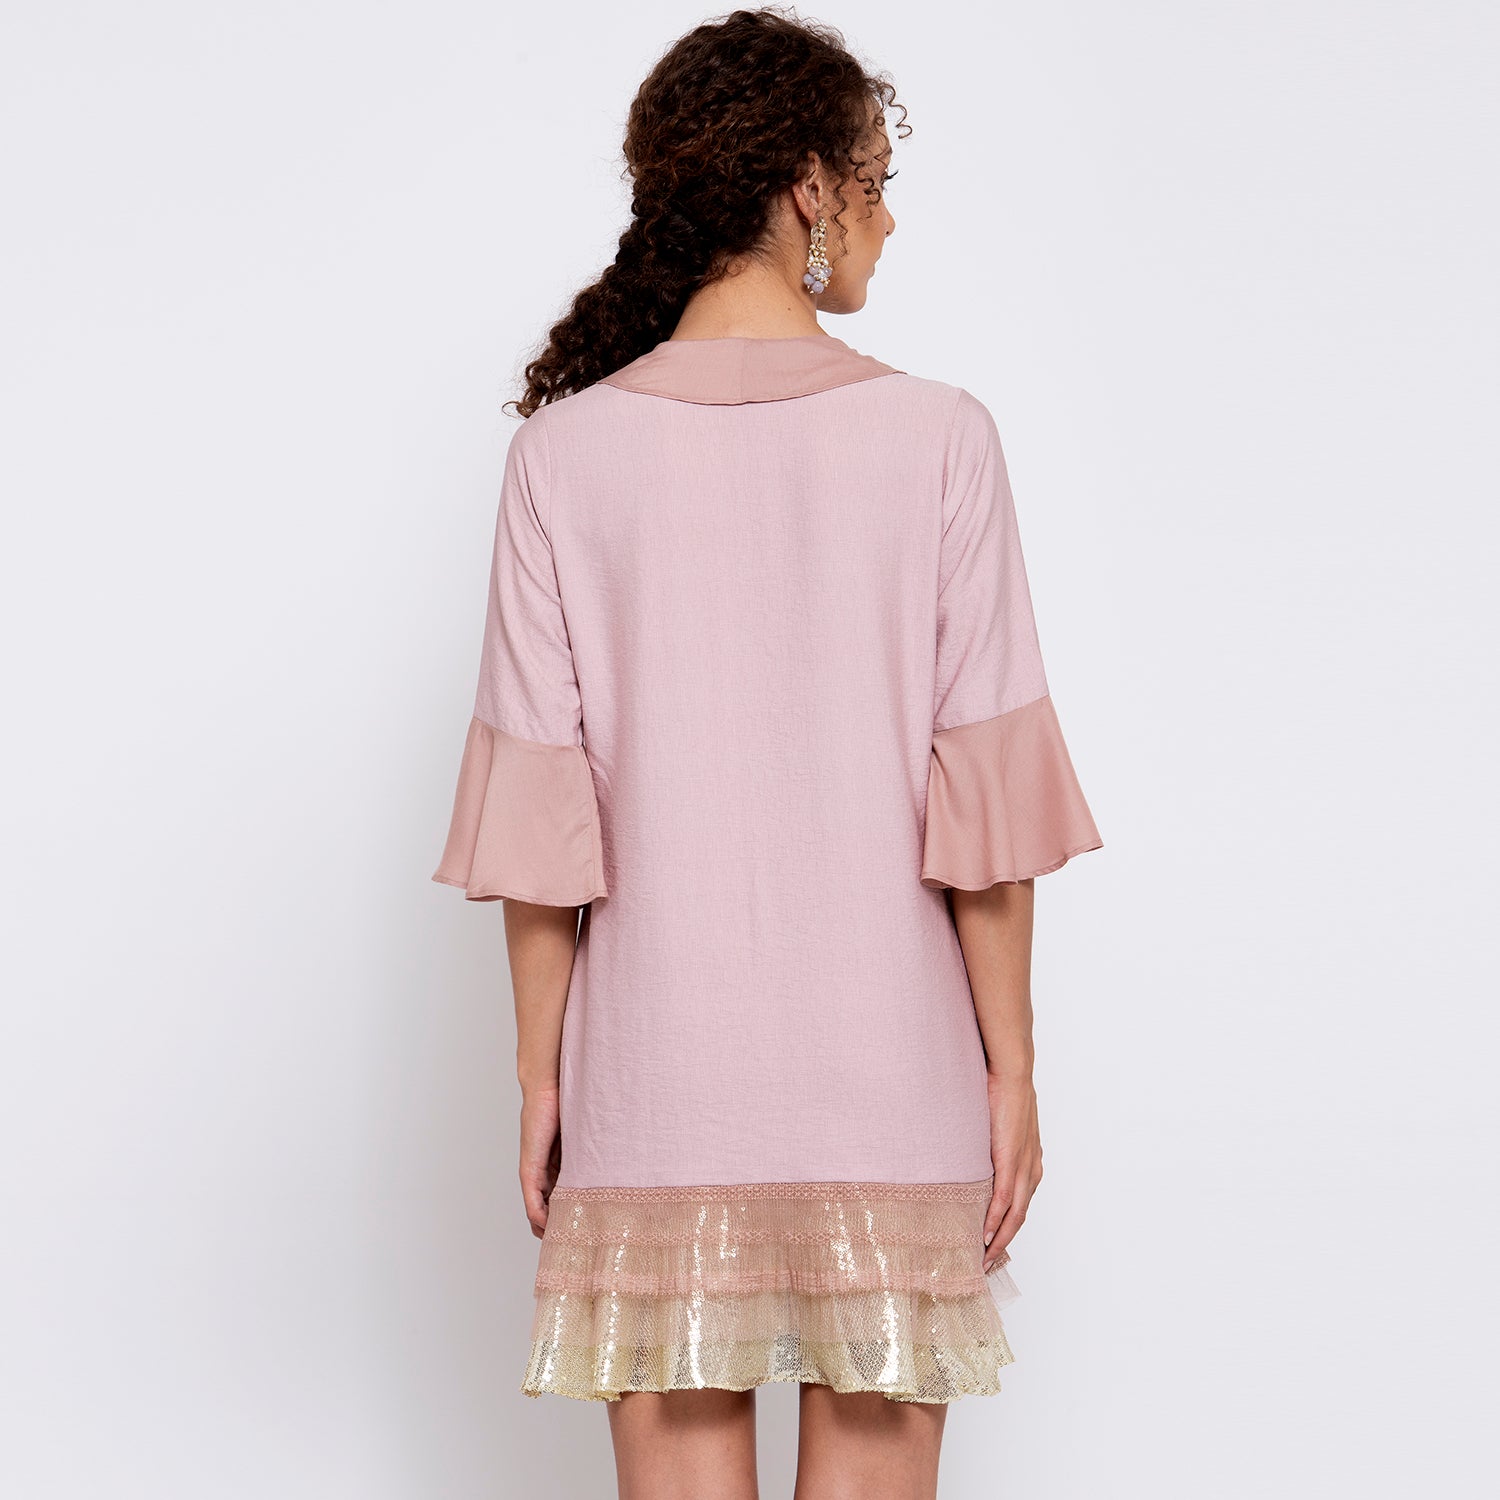 Pink Linen Frill Dress With Sequins Embroidery At Bottom